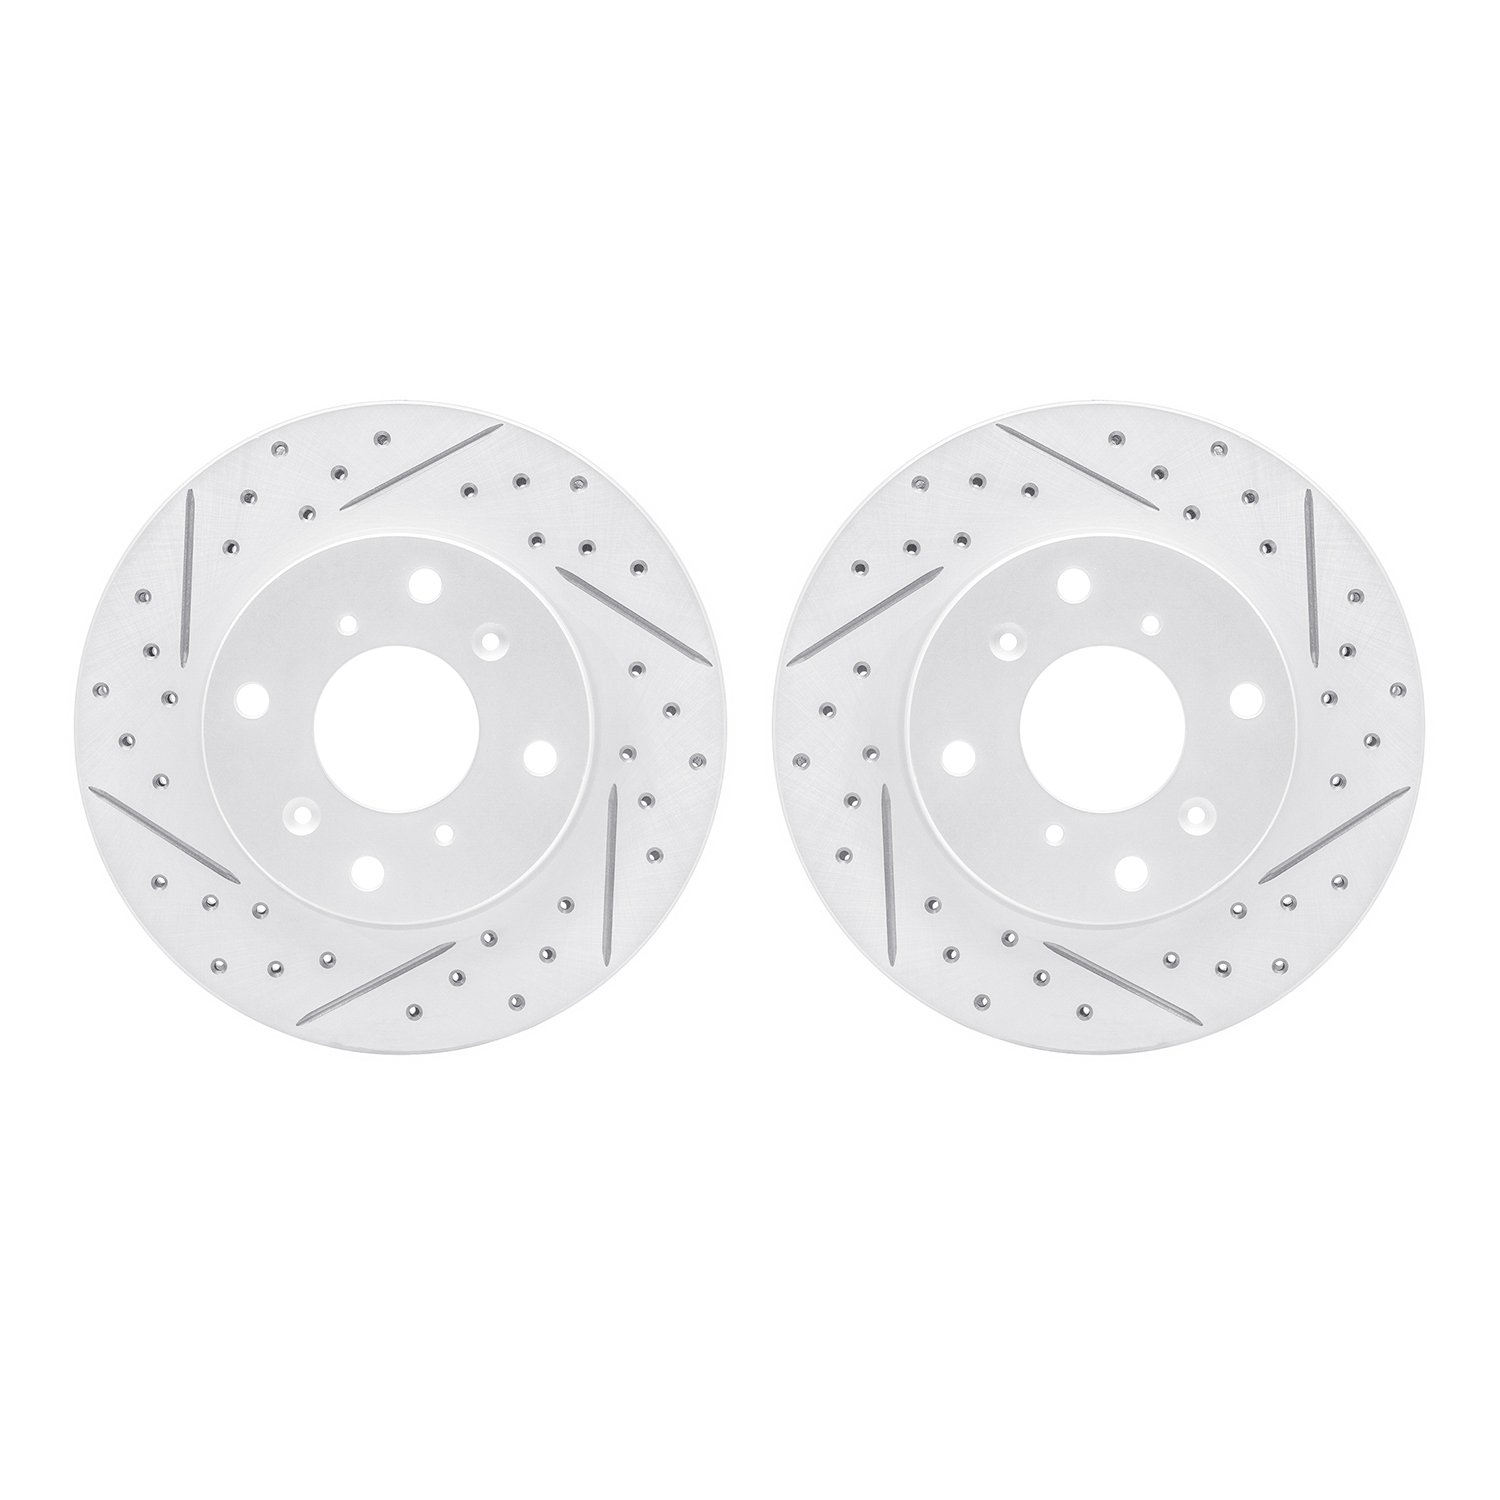 2002-59001 Geoperformance Drilled/Slotted Brake Rotors, 1998-2002 Acura/Honda, Position: Front